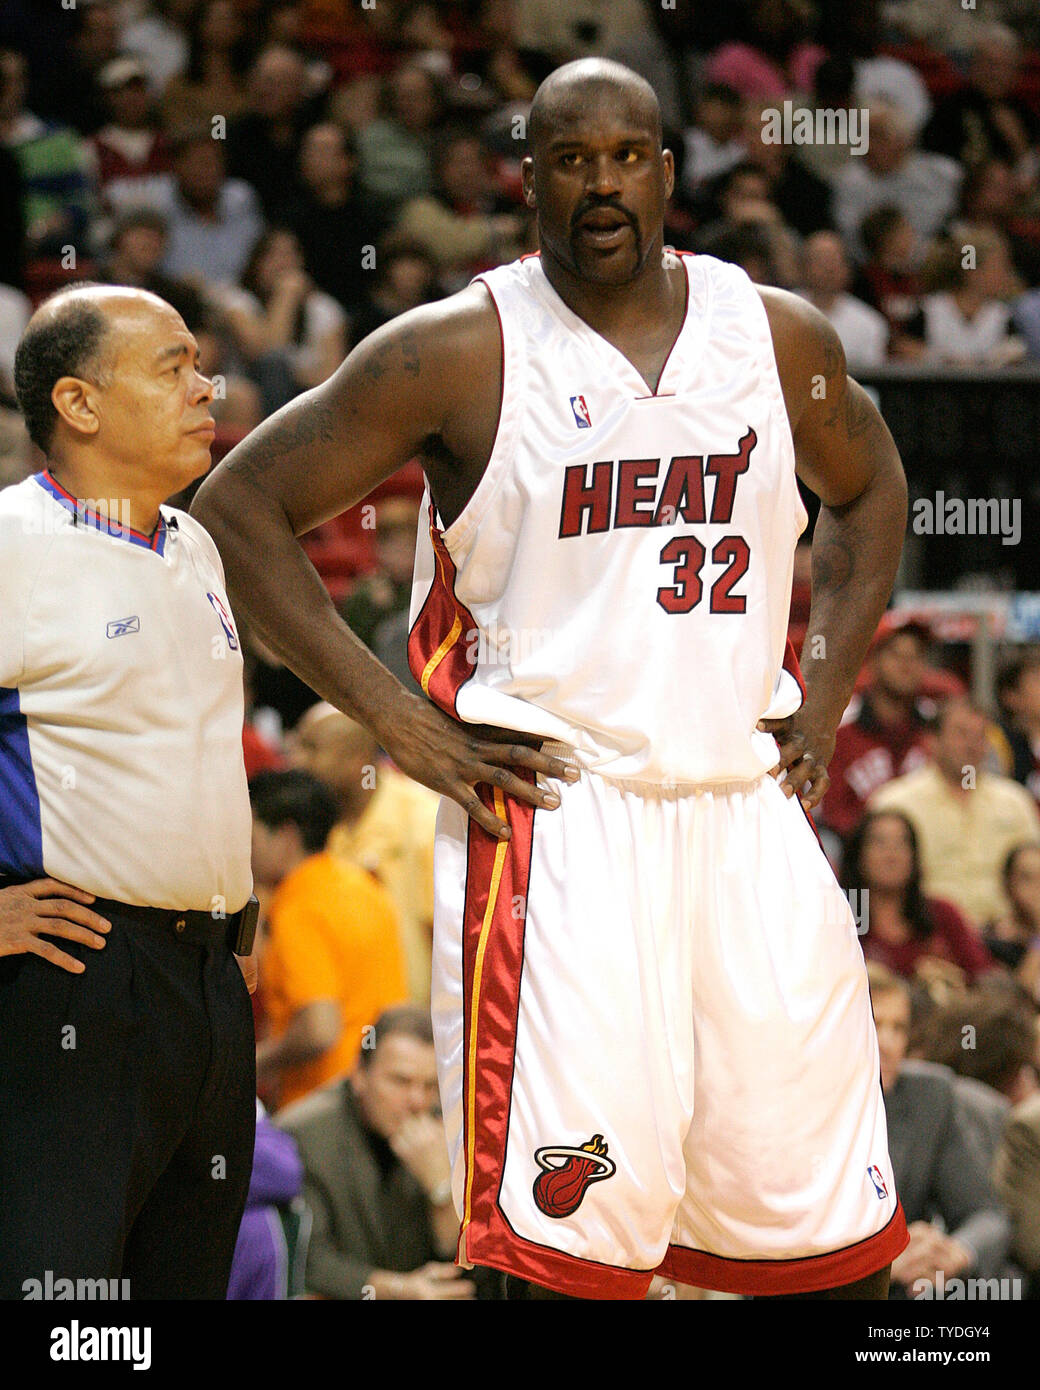 Shaquille O'neal  Shaquille o'neal, Miami heat, Heat